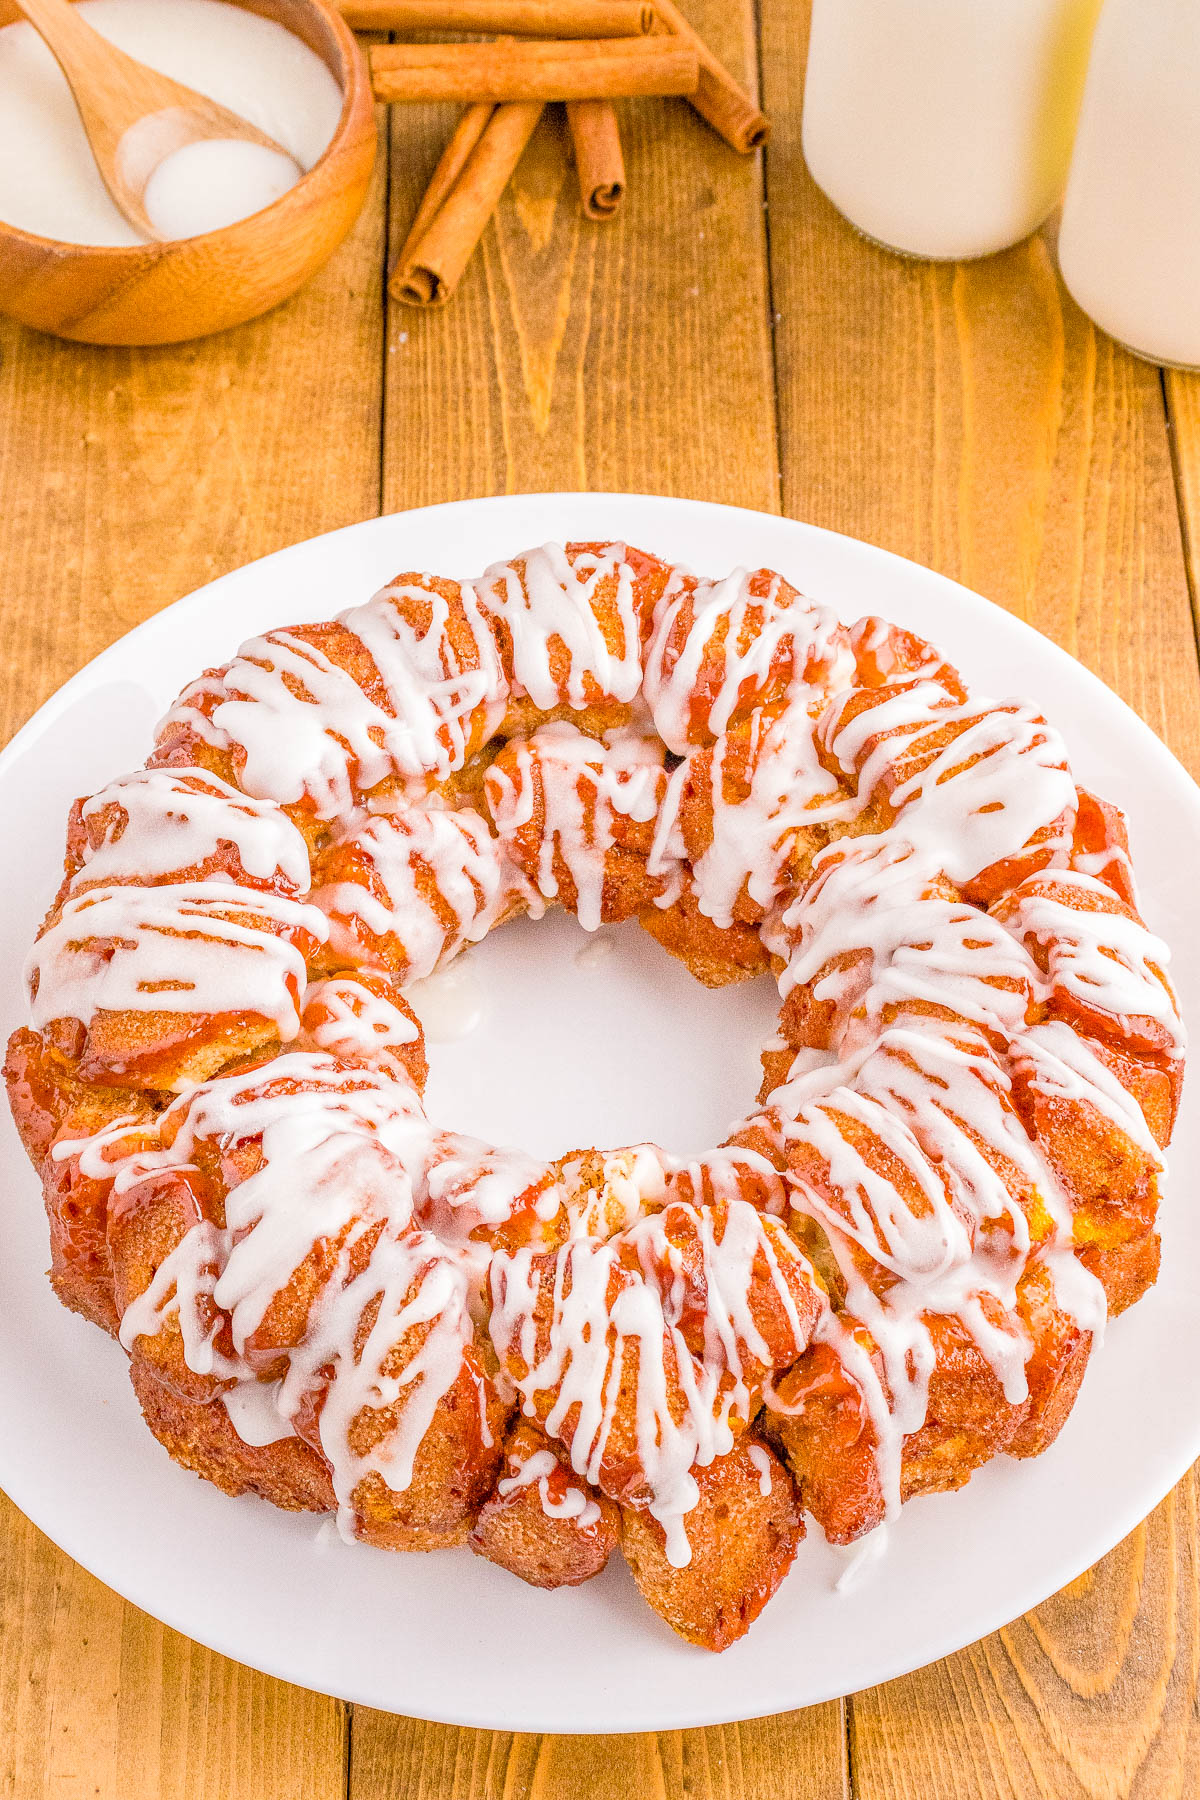 Cinnamon roll monkey bread with white icing drizzle on a white plate, surrounded by cinnamon sticks, a bowl of sugar, and a glass of milk on a wooden table.